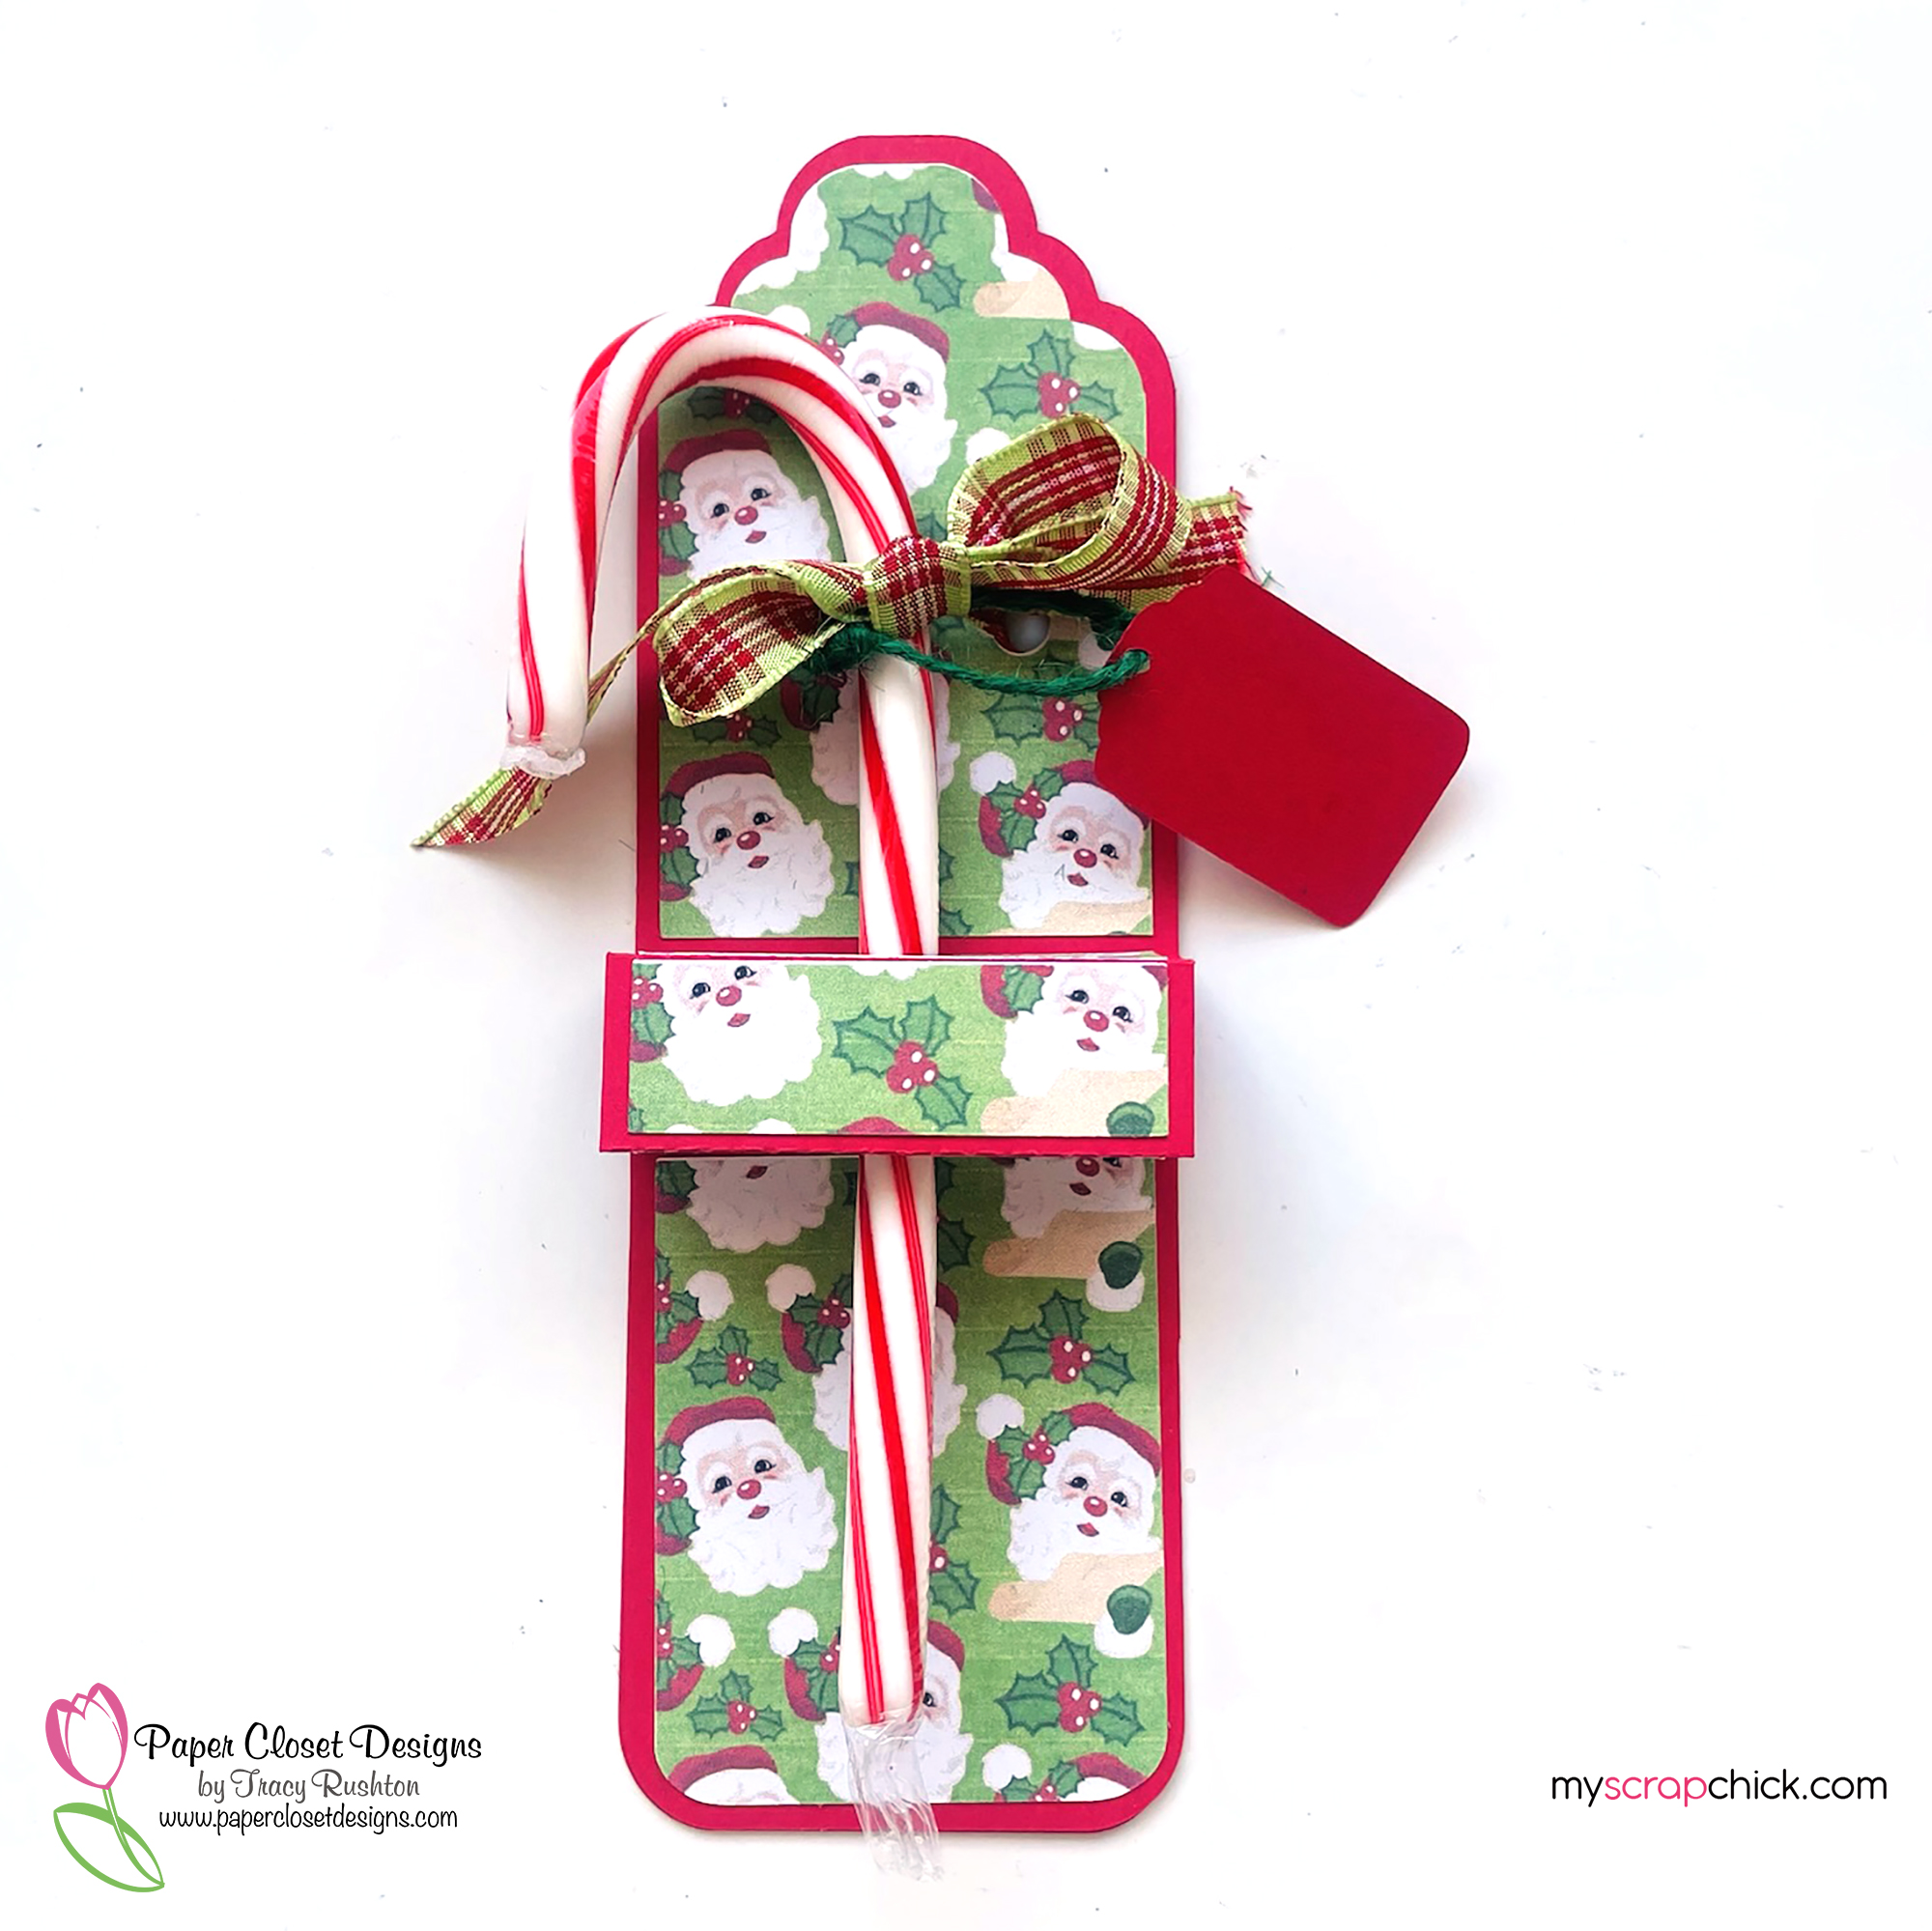 Candy Cane Tag with printed paper